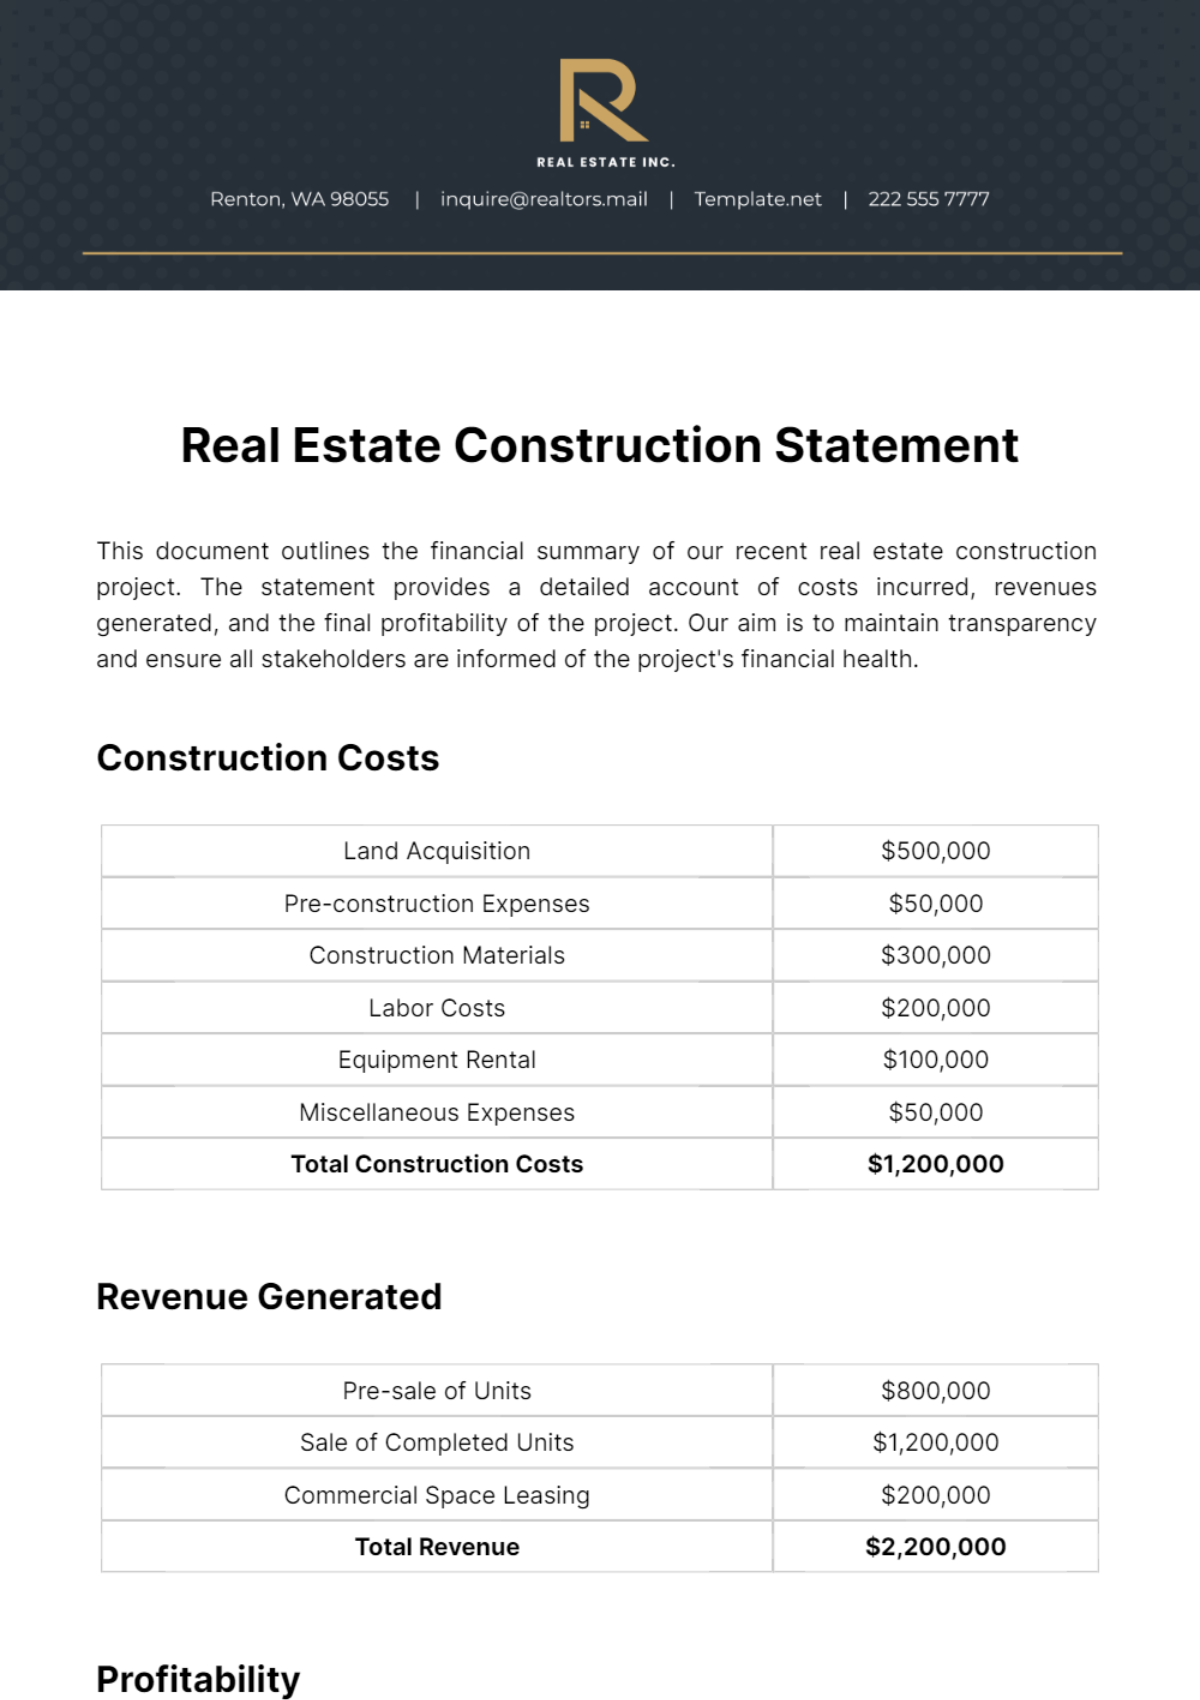 Real Estate Construction Statement Template